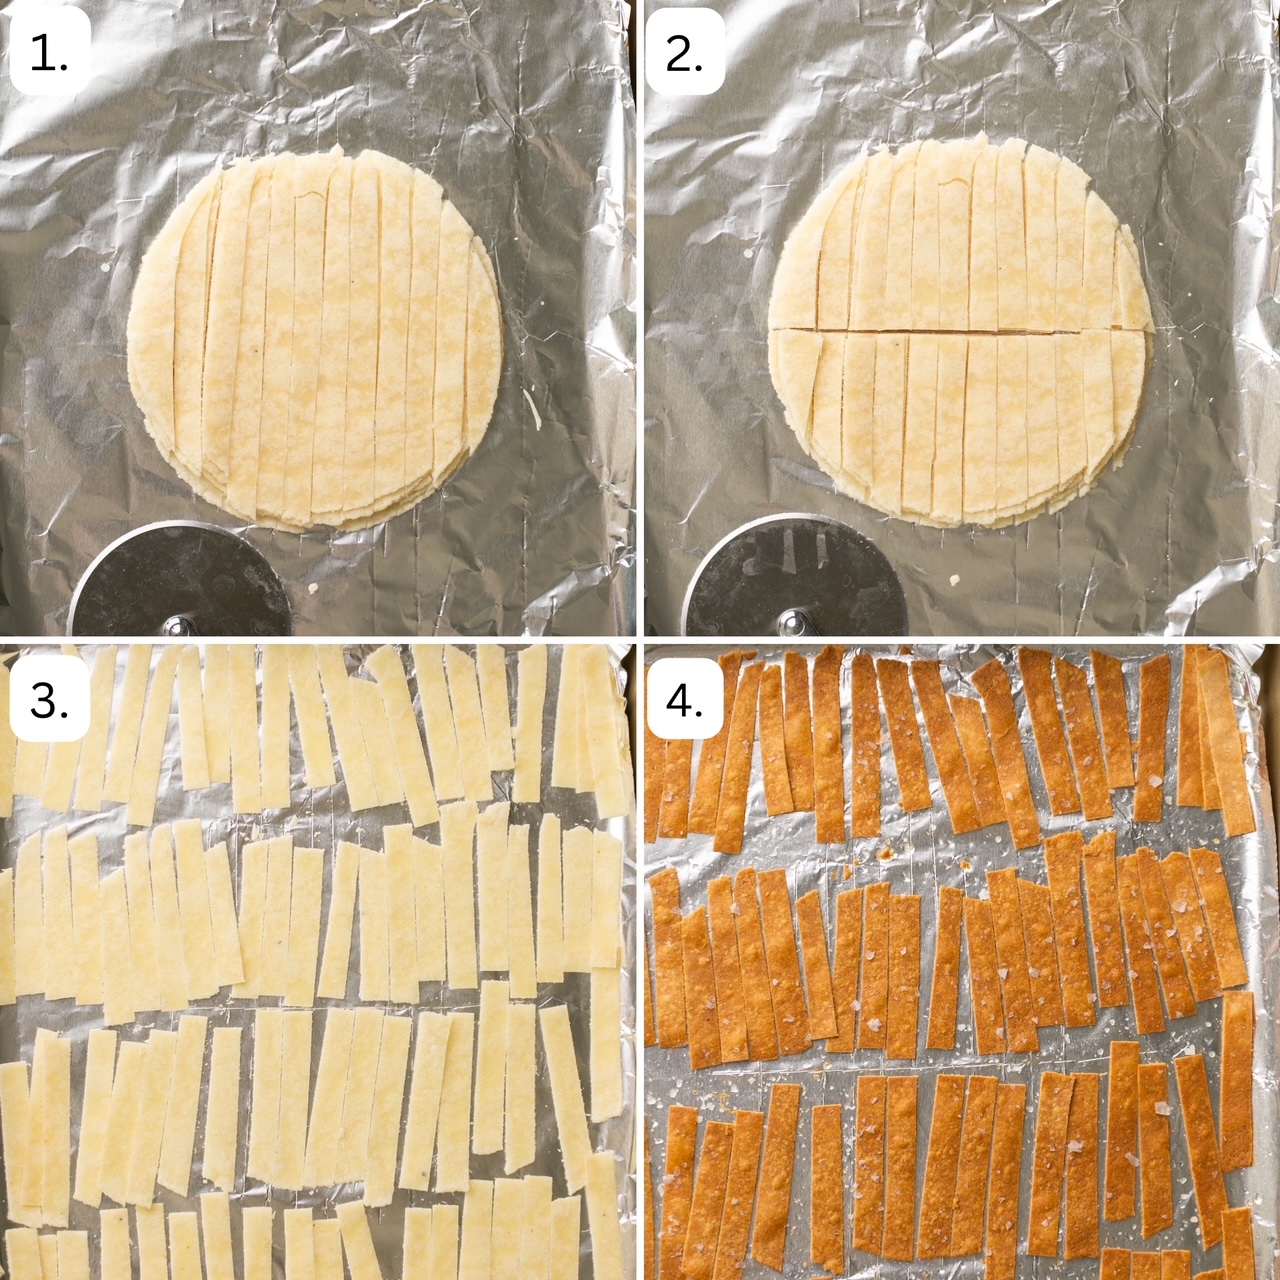 Step by step photos showing how to make homemade tortilla strips